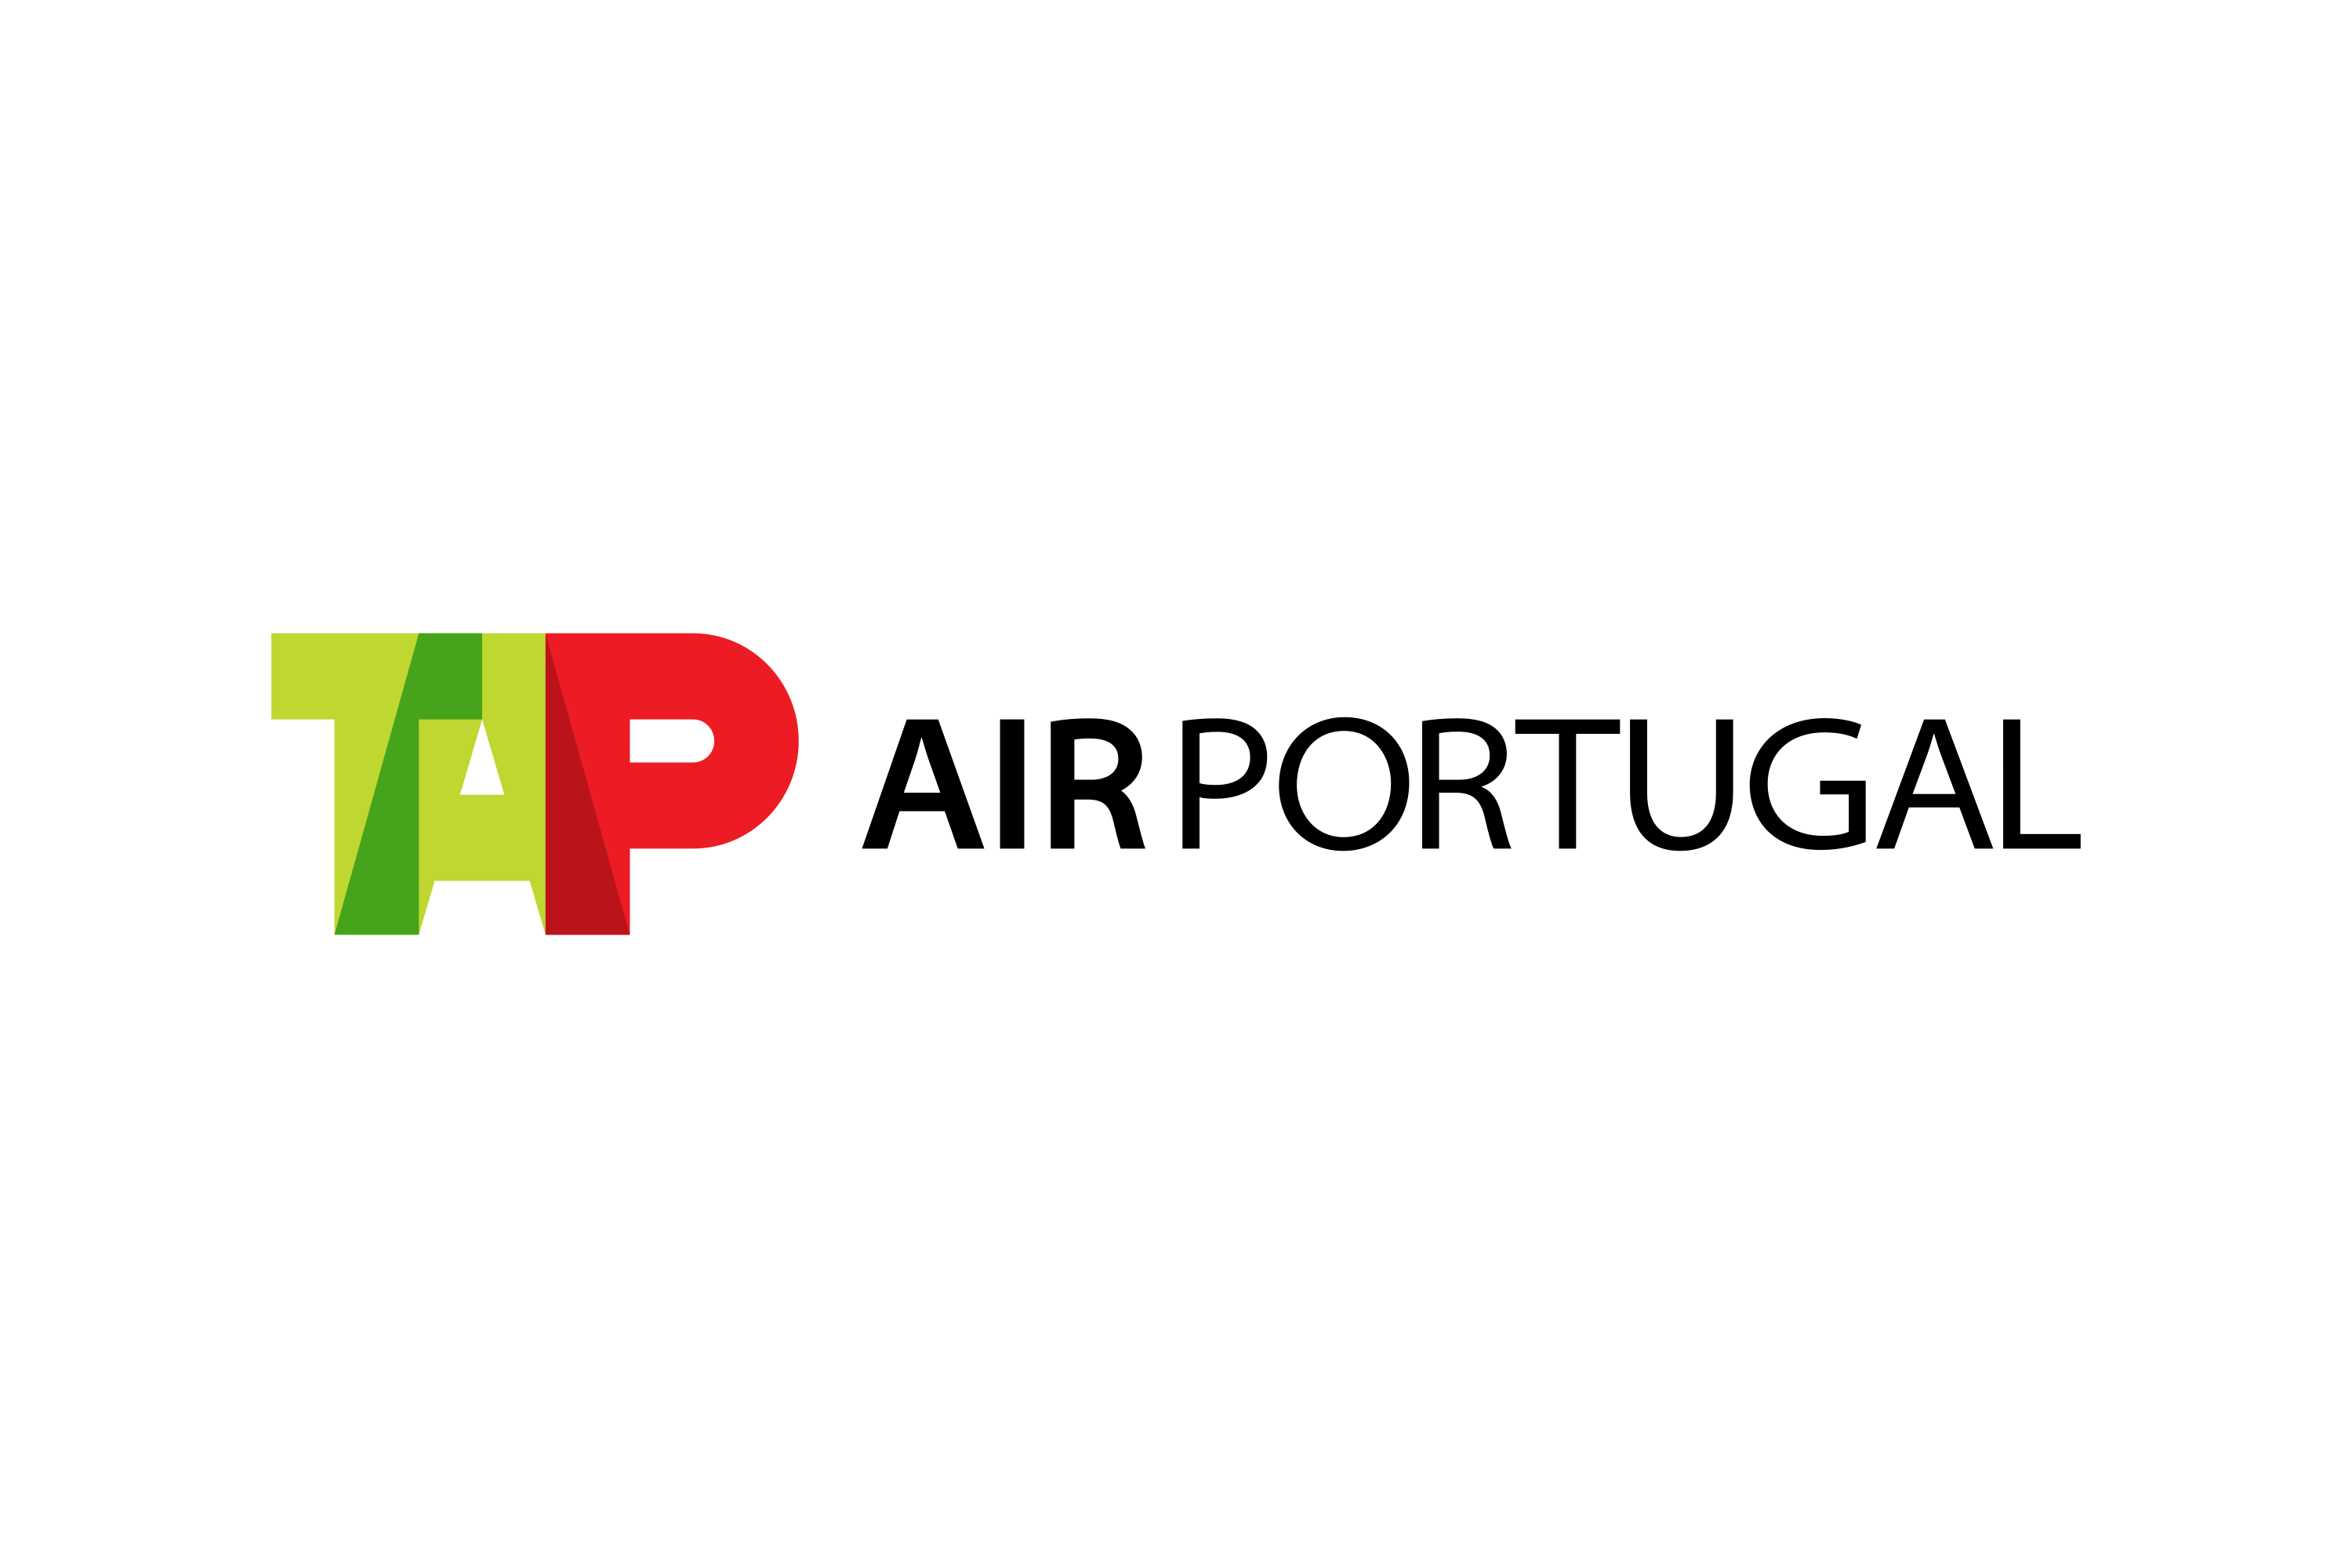 Download TAP Air Portugal Logo in SVG Vector or PNG File ...